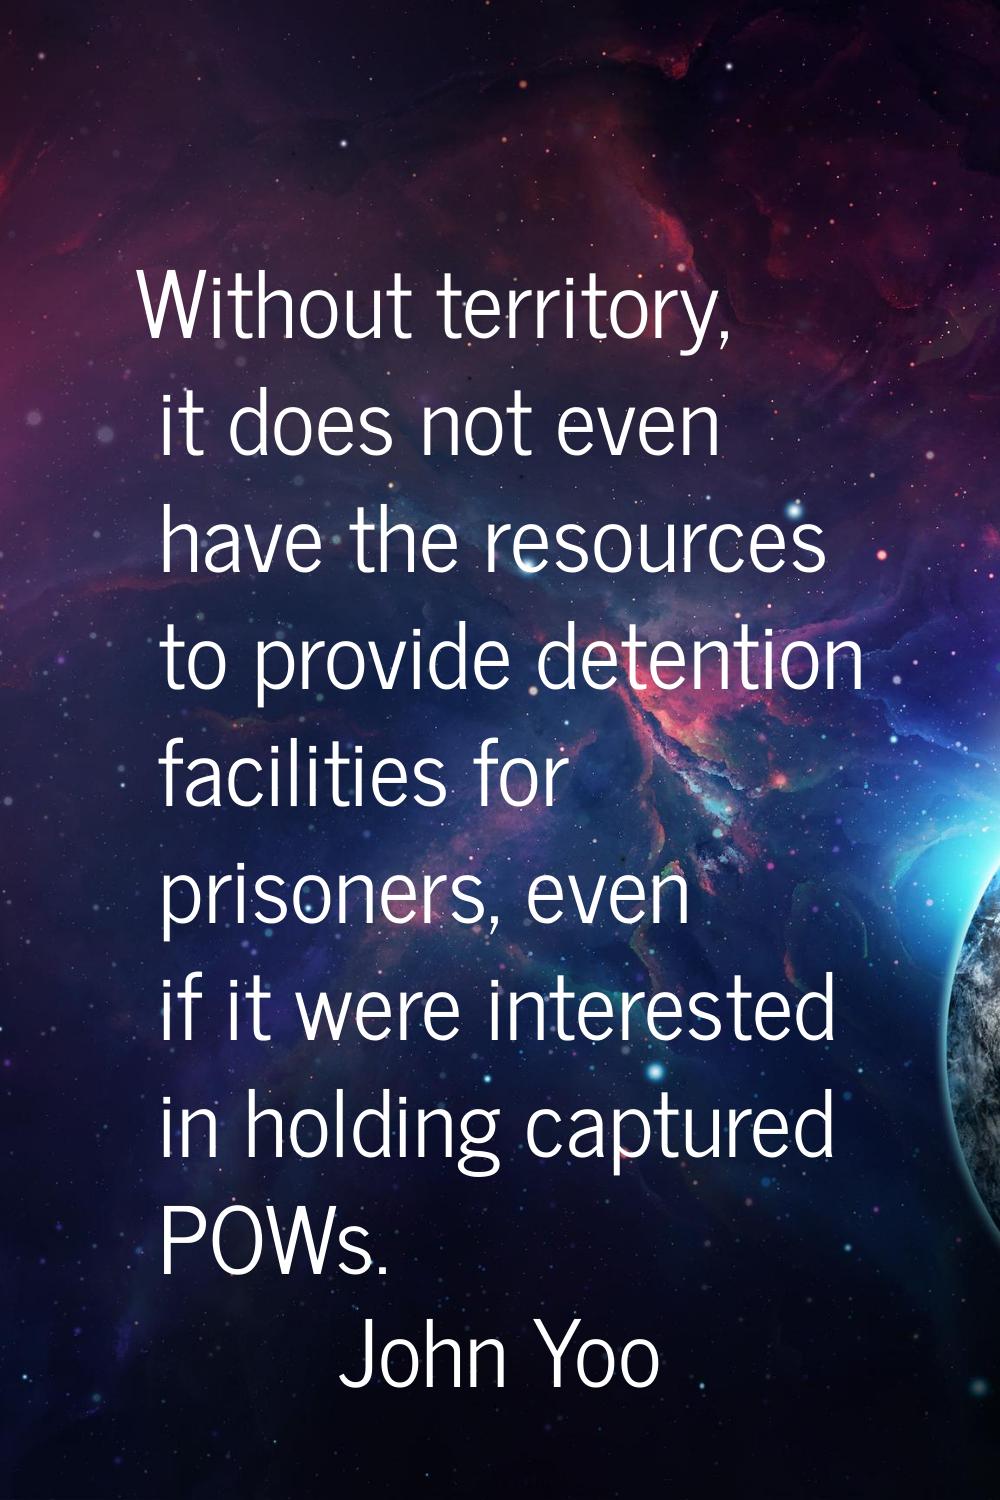 Without territory, it does not even have the resources to provide detention facilities for prisoner